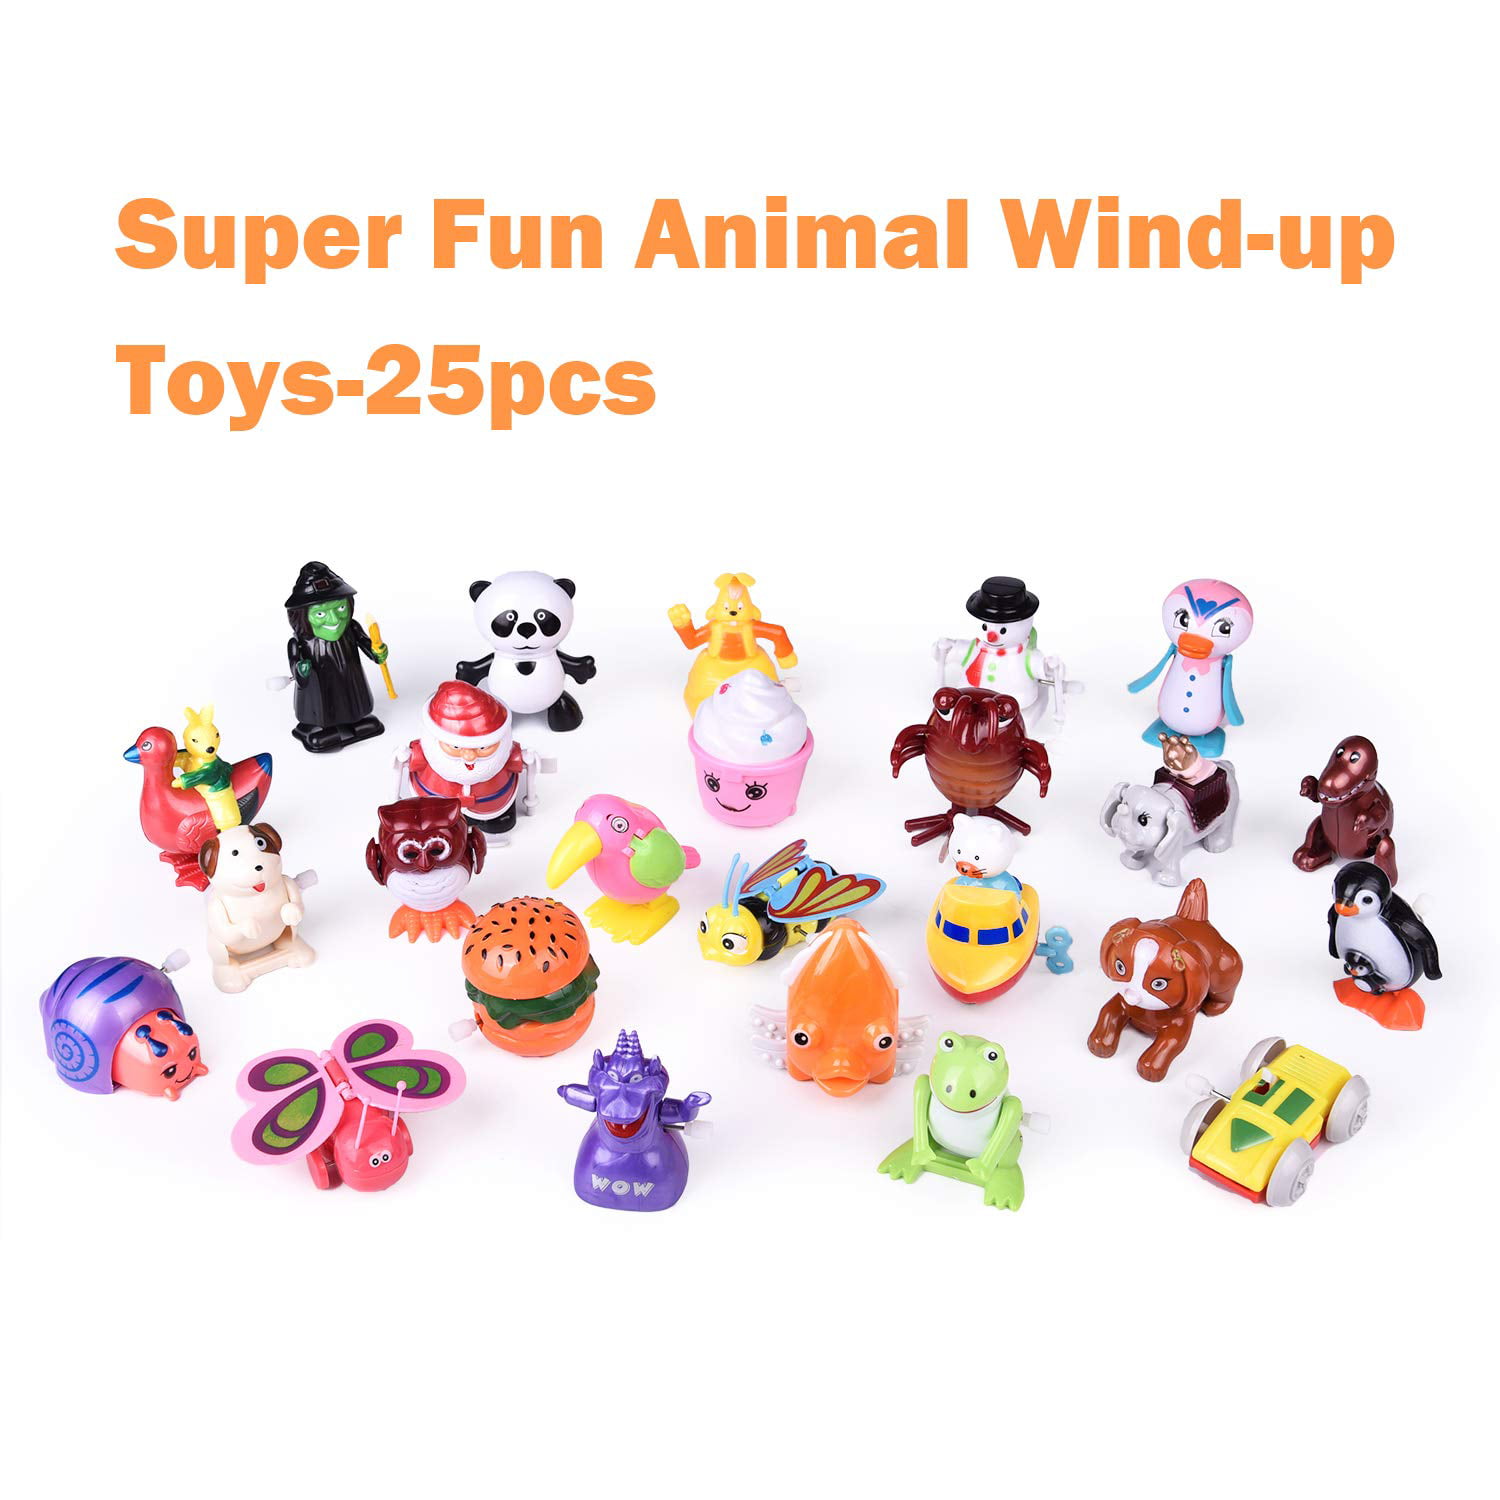 20 Pack Wind up Toys Assorted Mini Toy Animal for Childrens Party Gifts Kids Birthdays Random Styles 